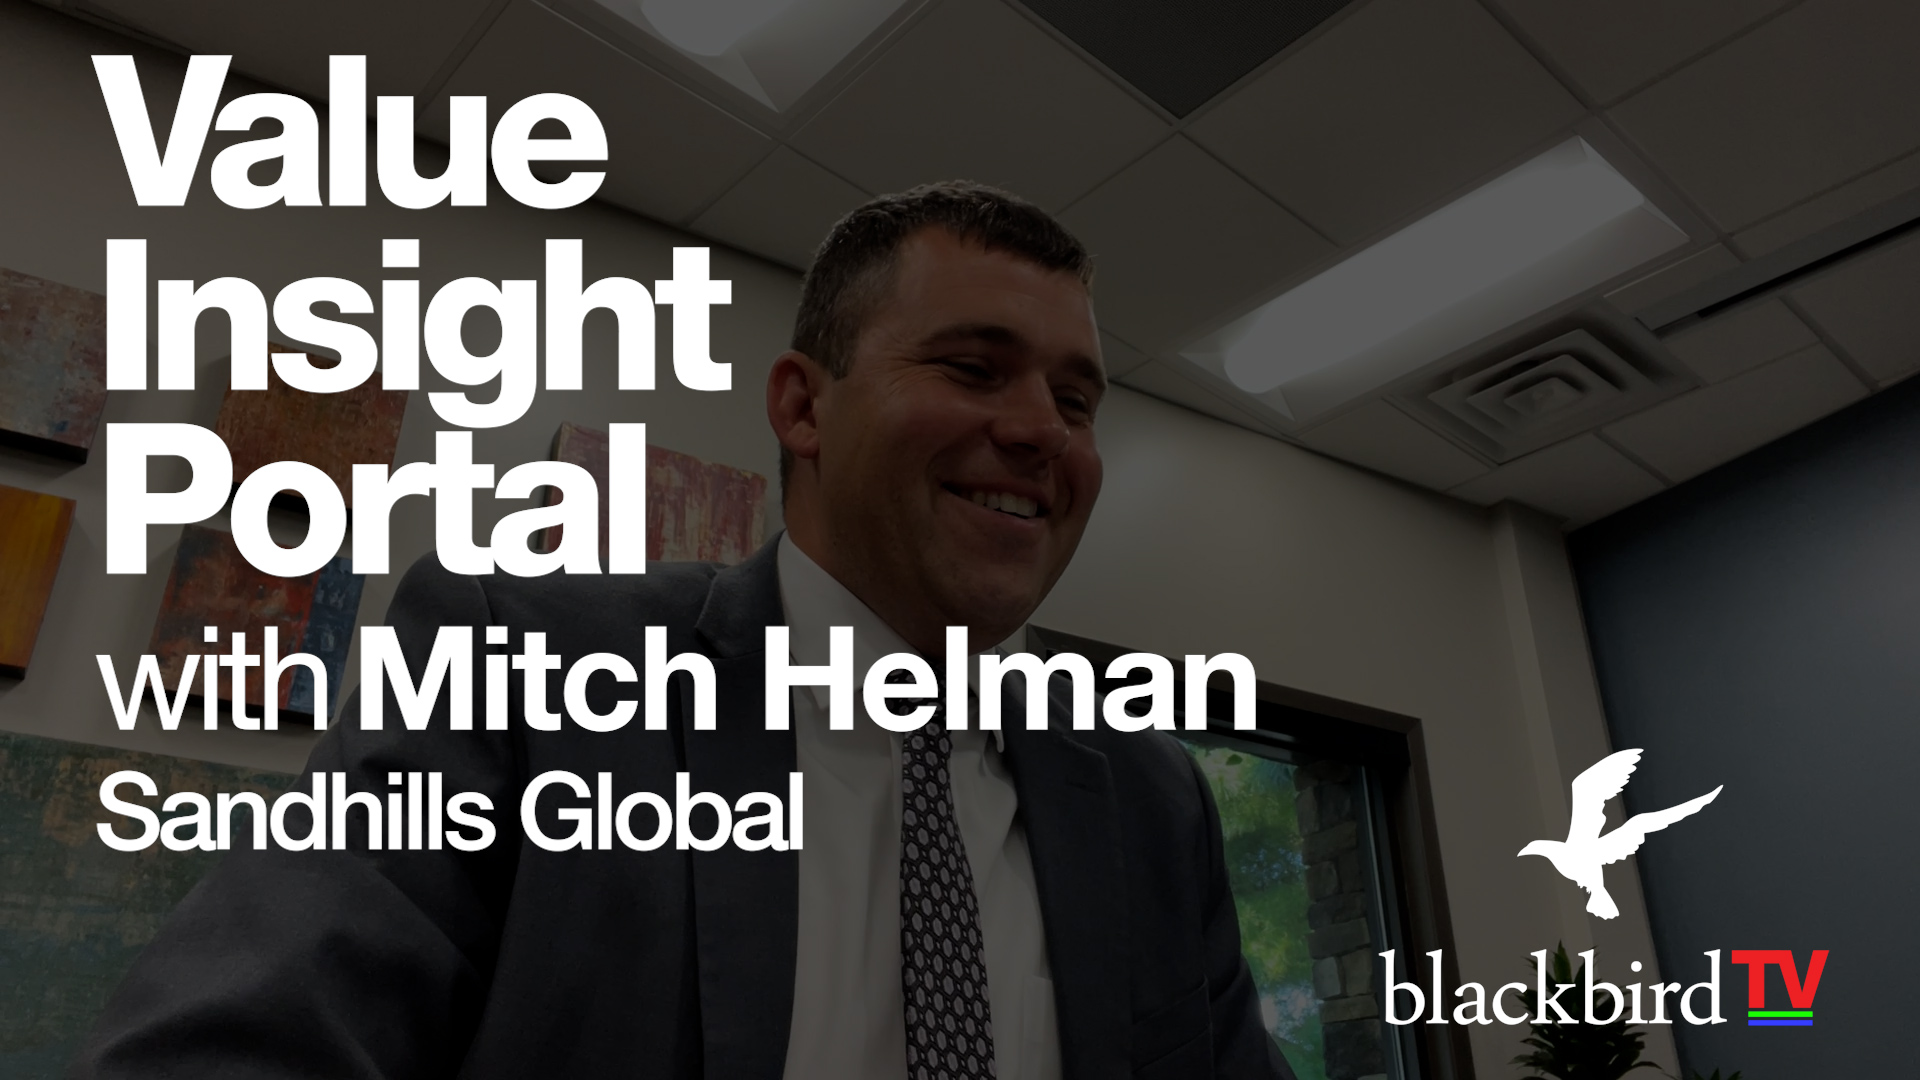 Value Insight Portal with Mitch Helman of Sandhills Global